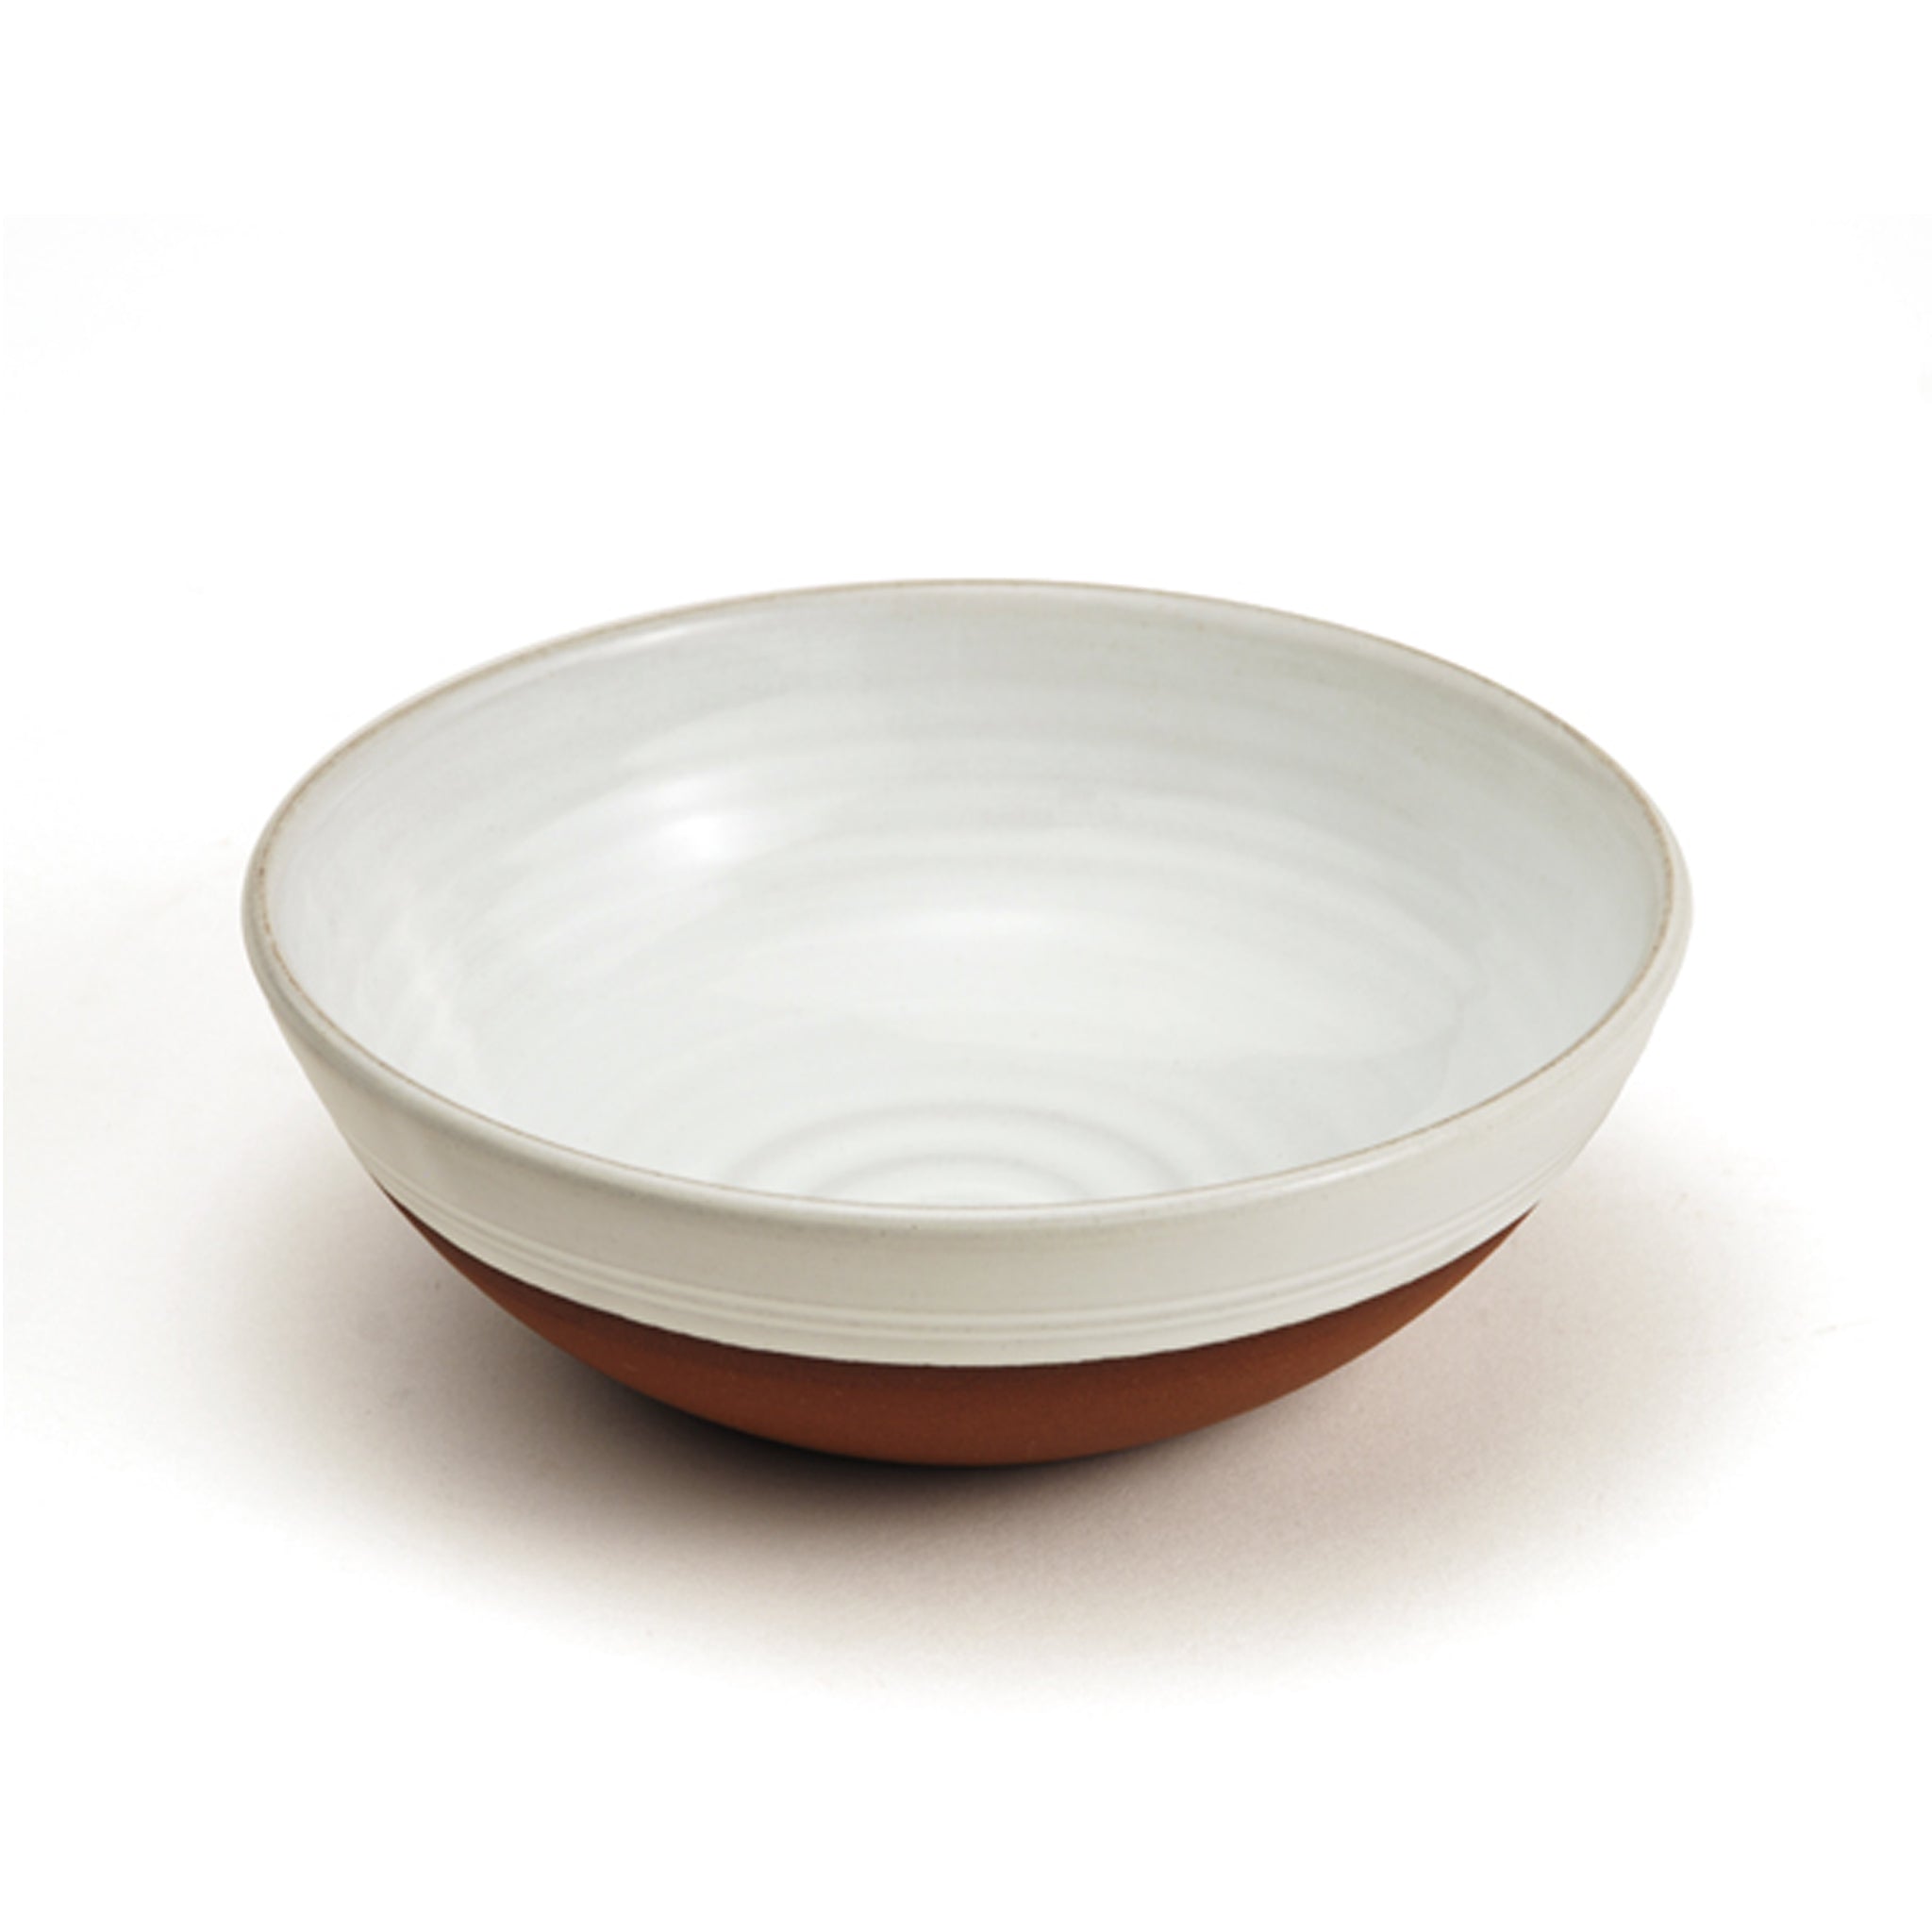 Classic Cereal Bowl - natural terracotta and white glaze